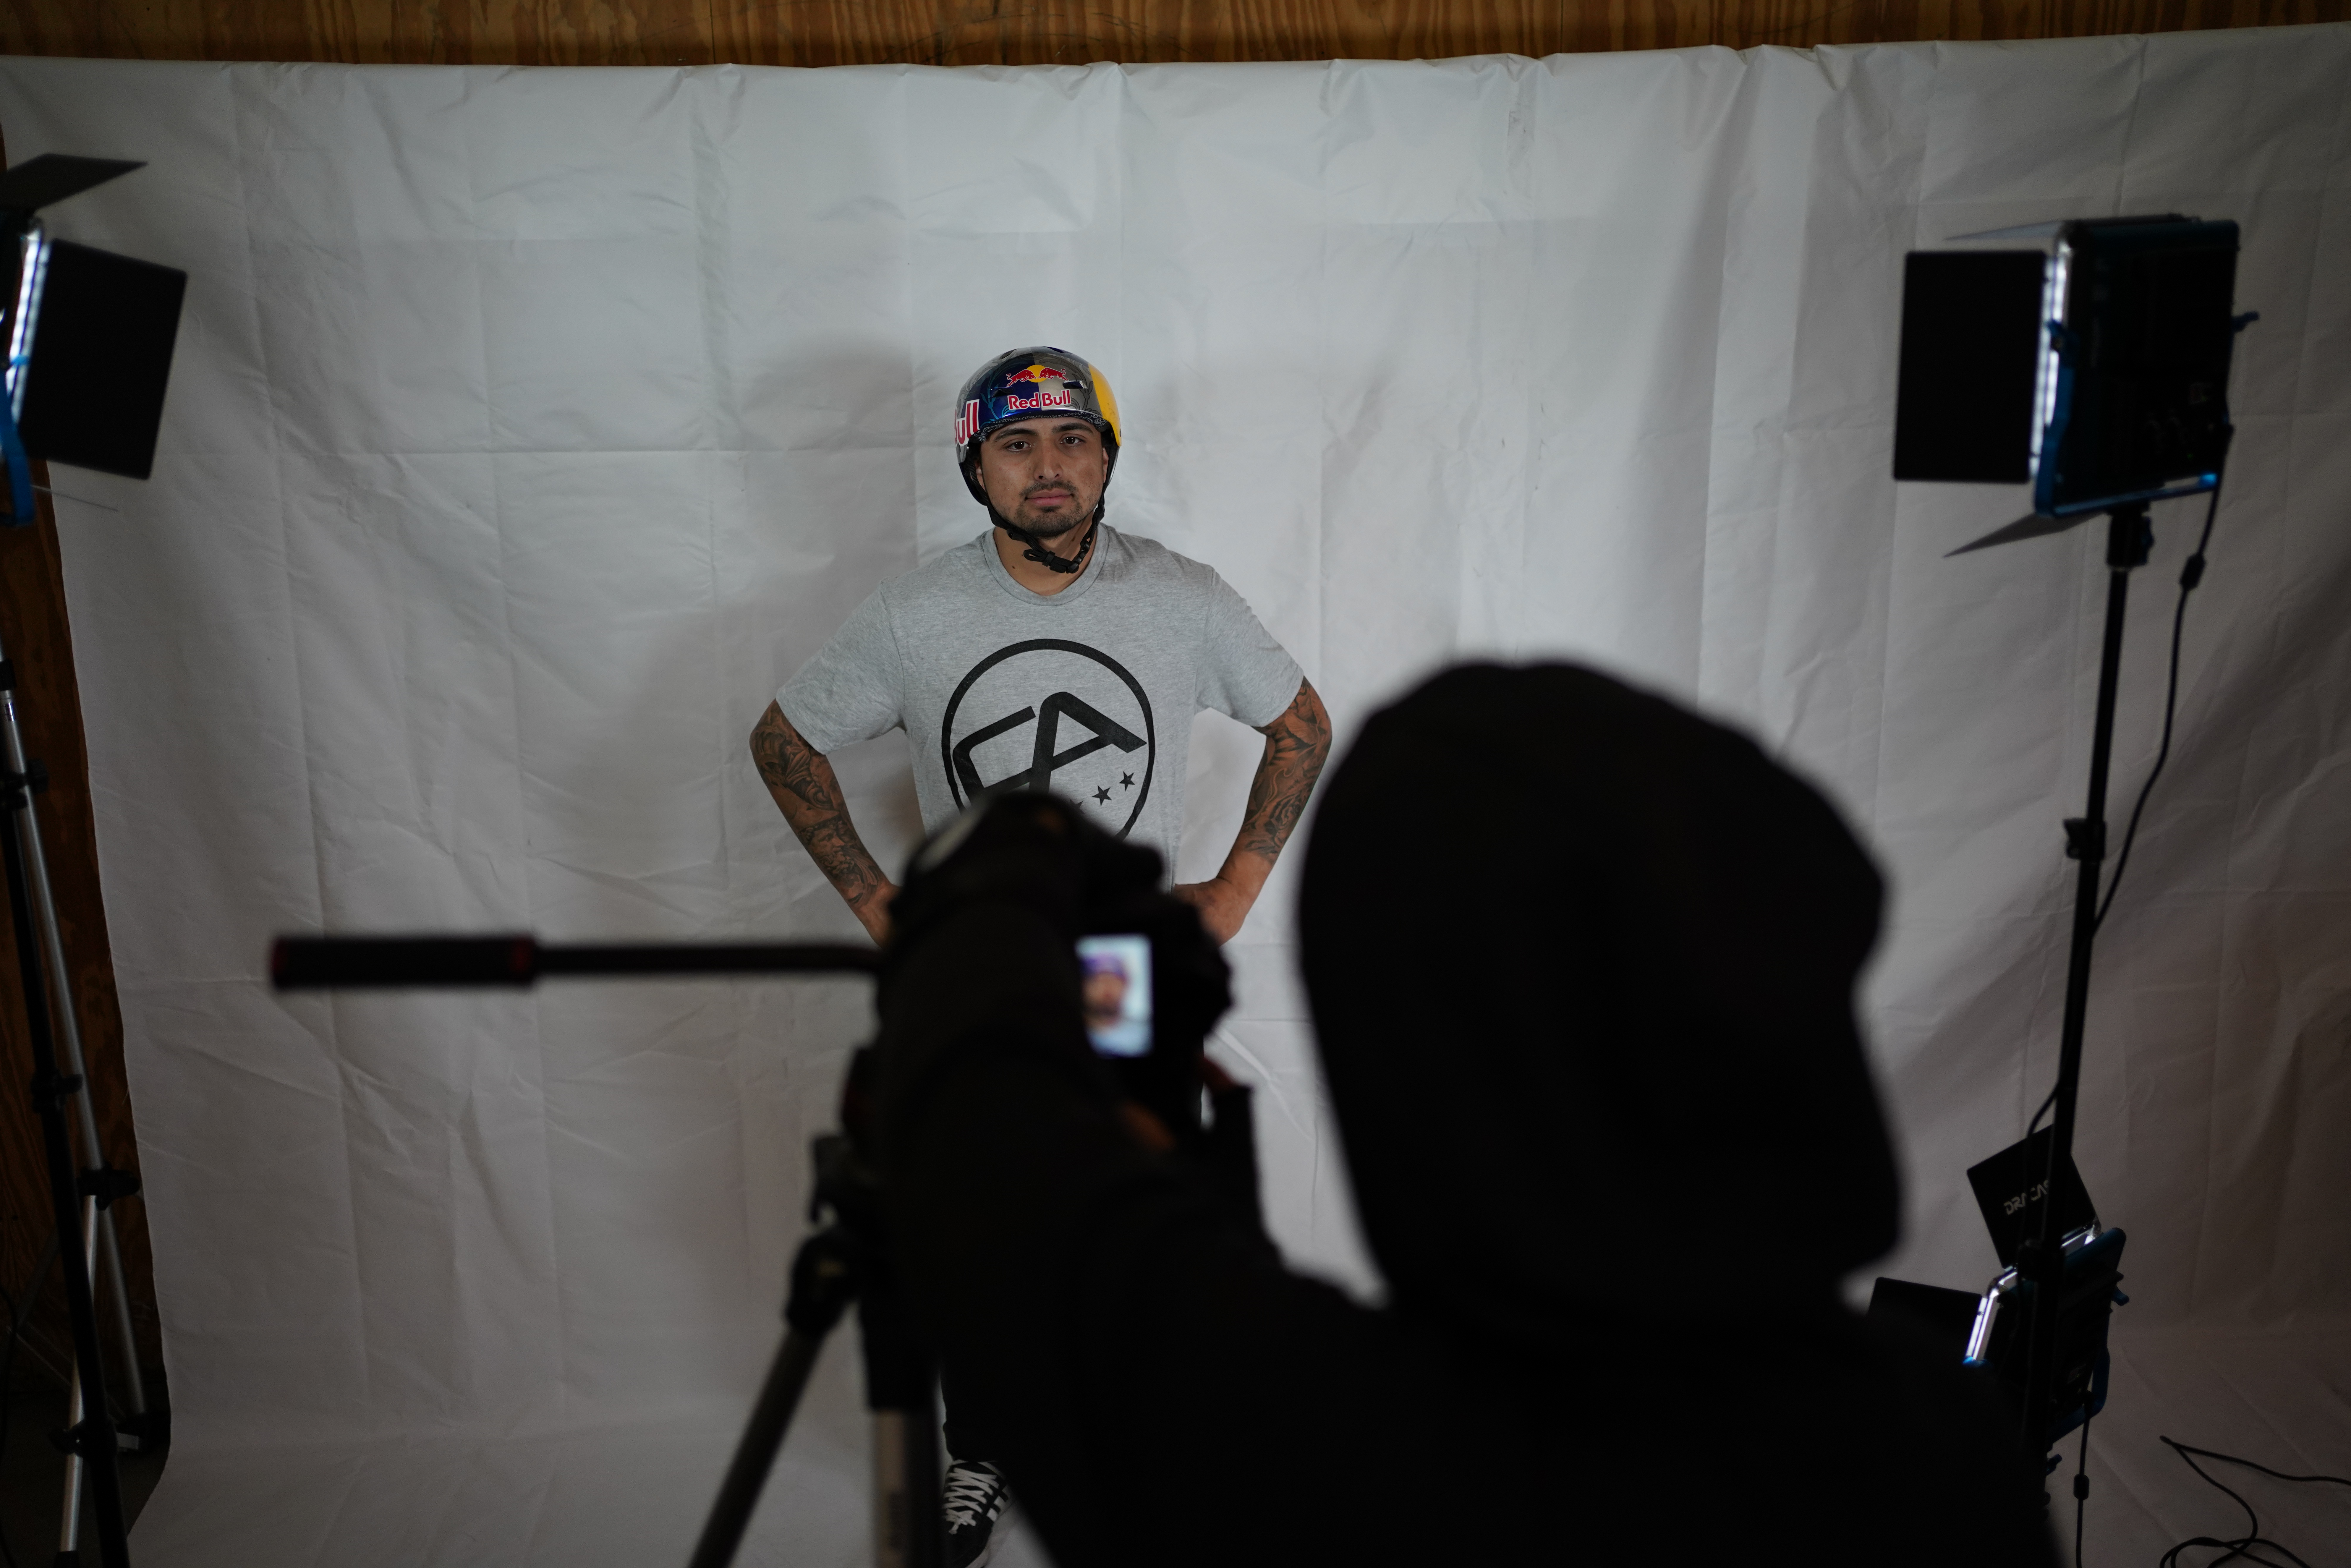 Free Agent rider, Daniel Sandoval, having his picture taken at Woodward.